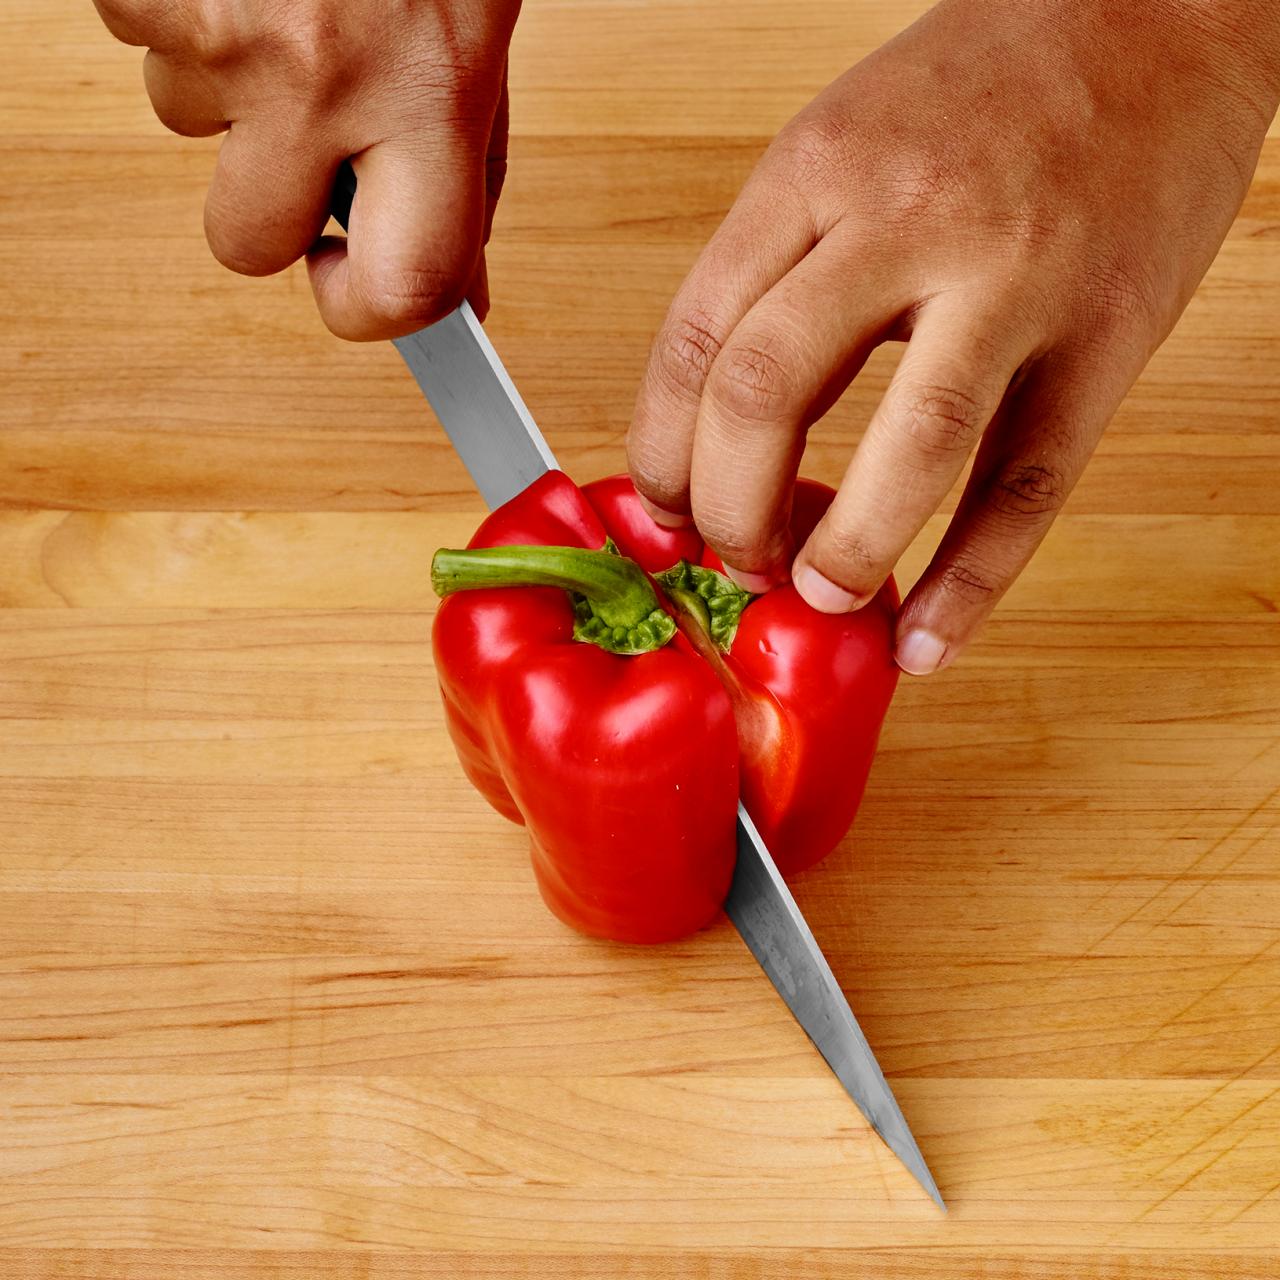 Knife Skills: How to Cut a Bell Pepper 